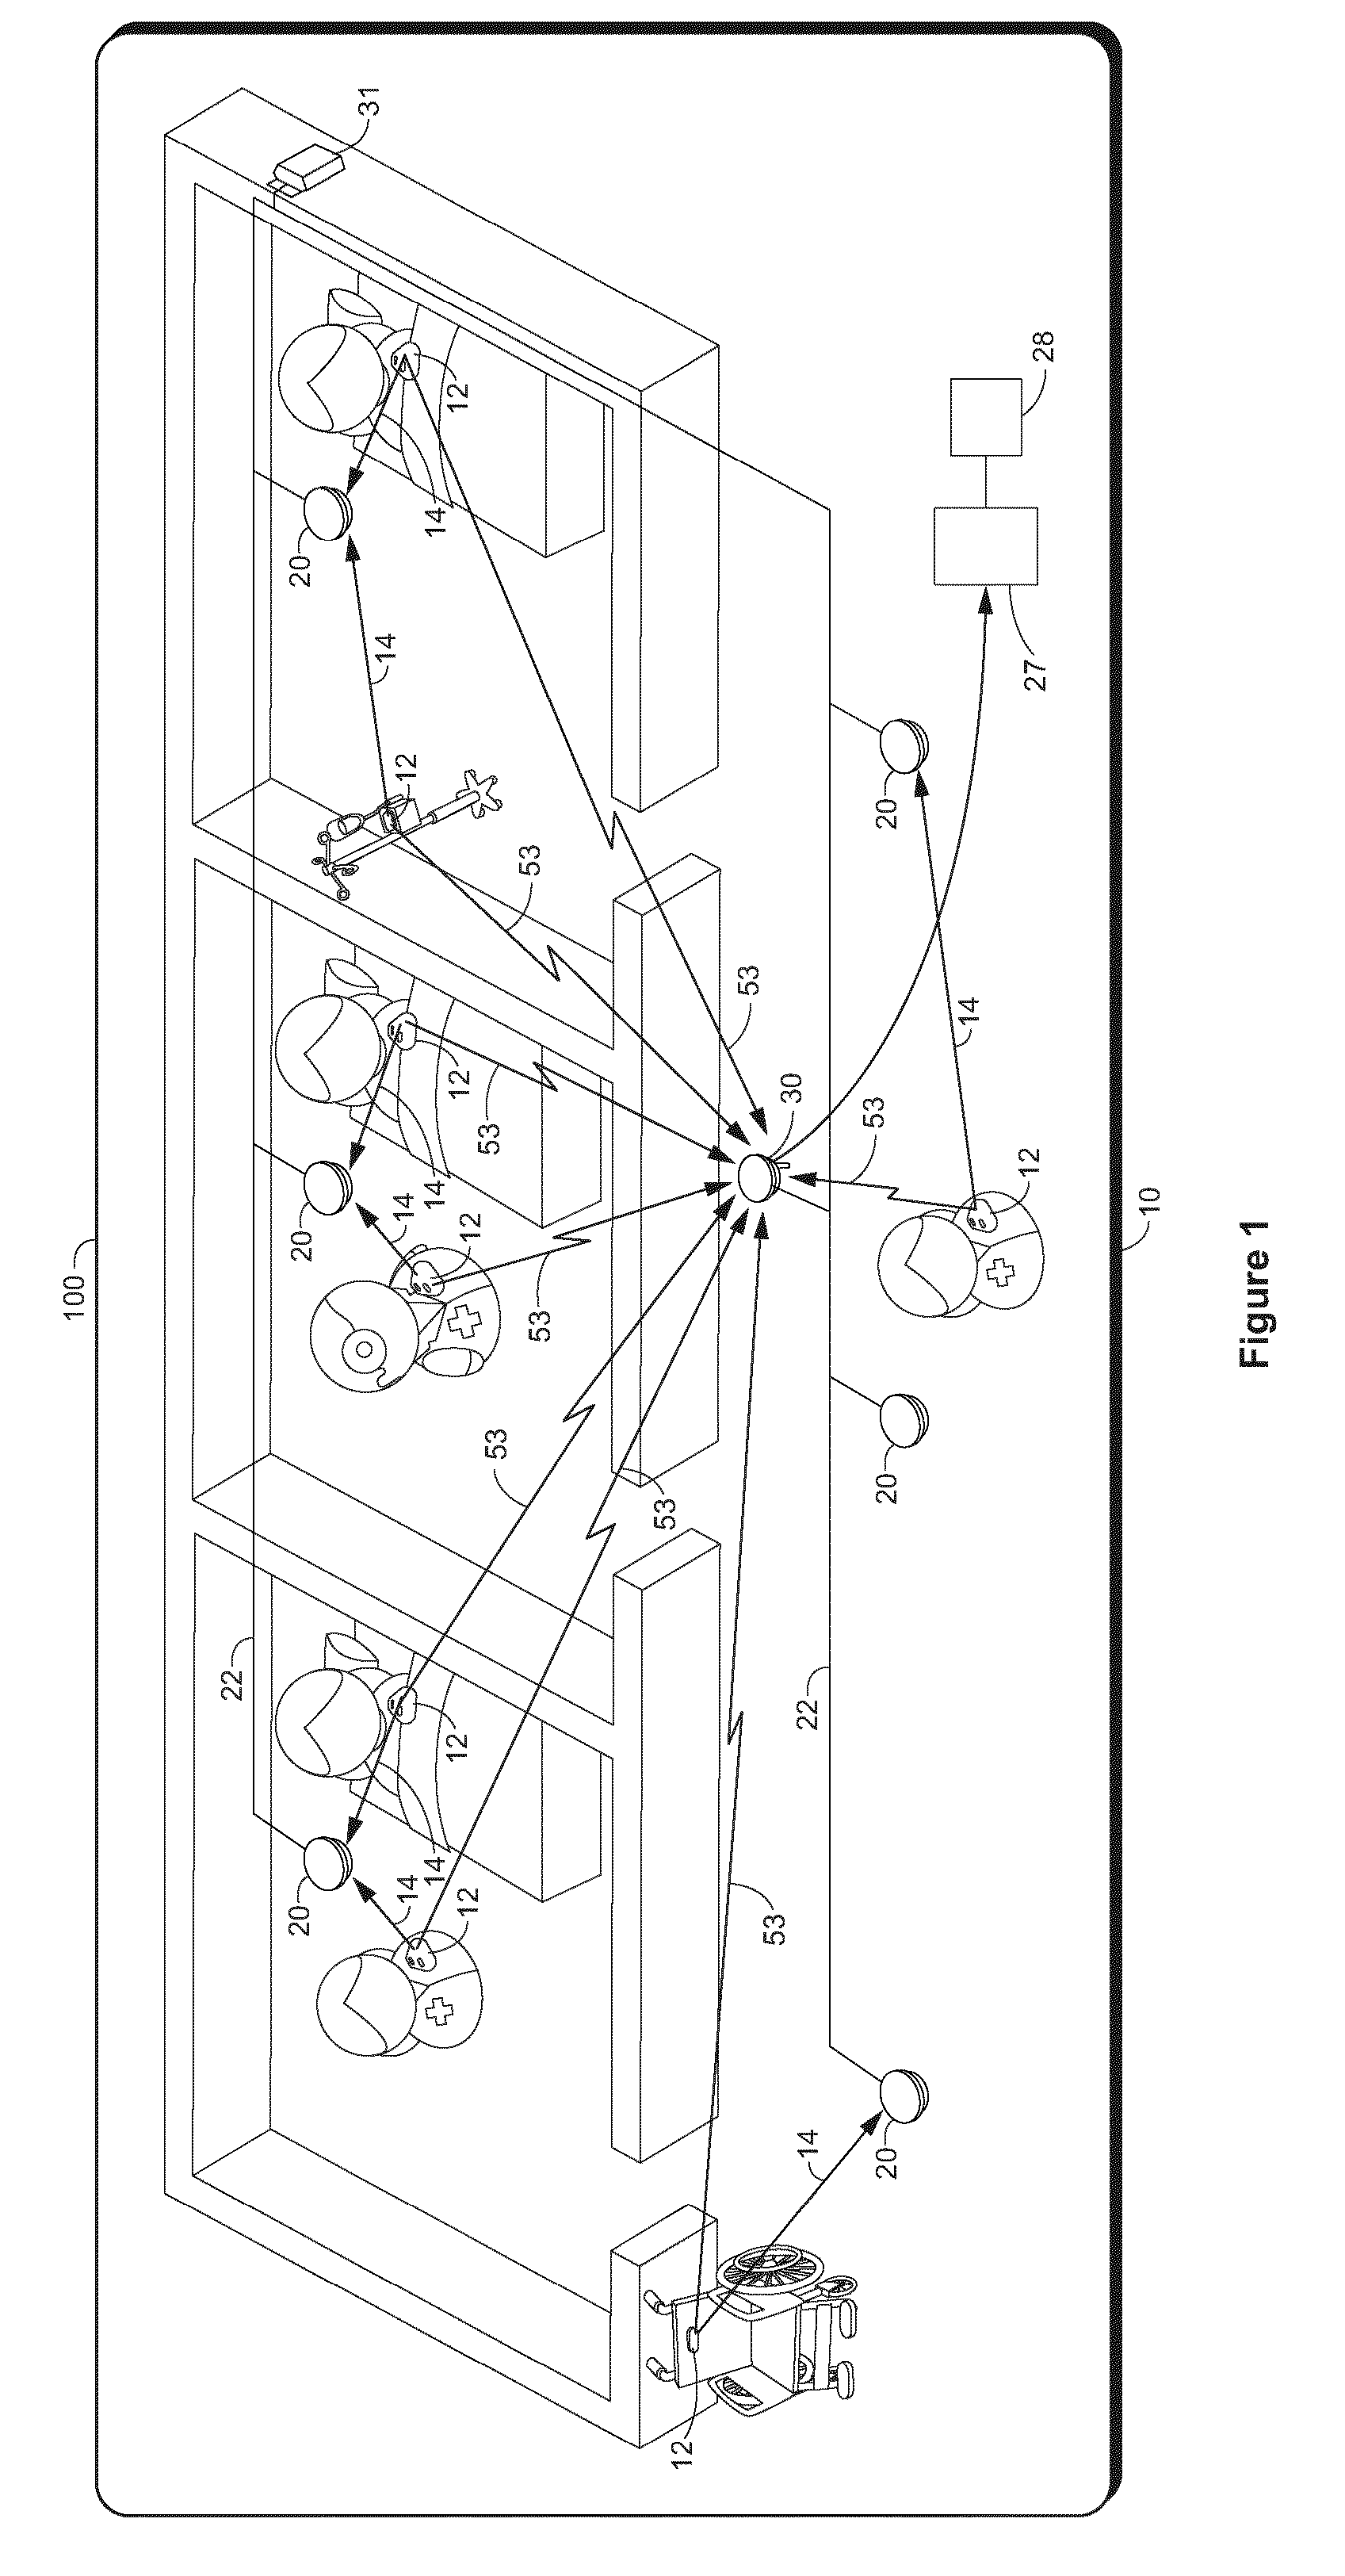 Systems and methods for effecting good hygiene practices